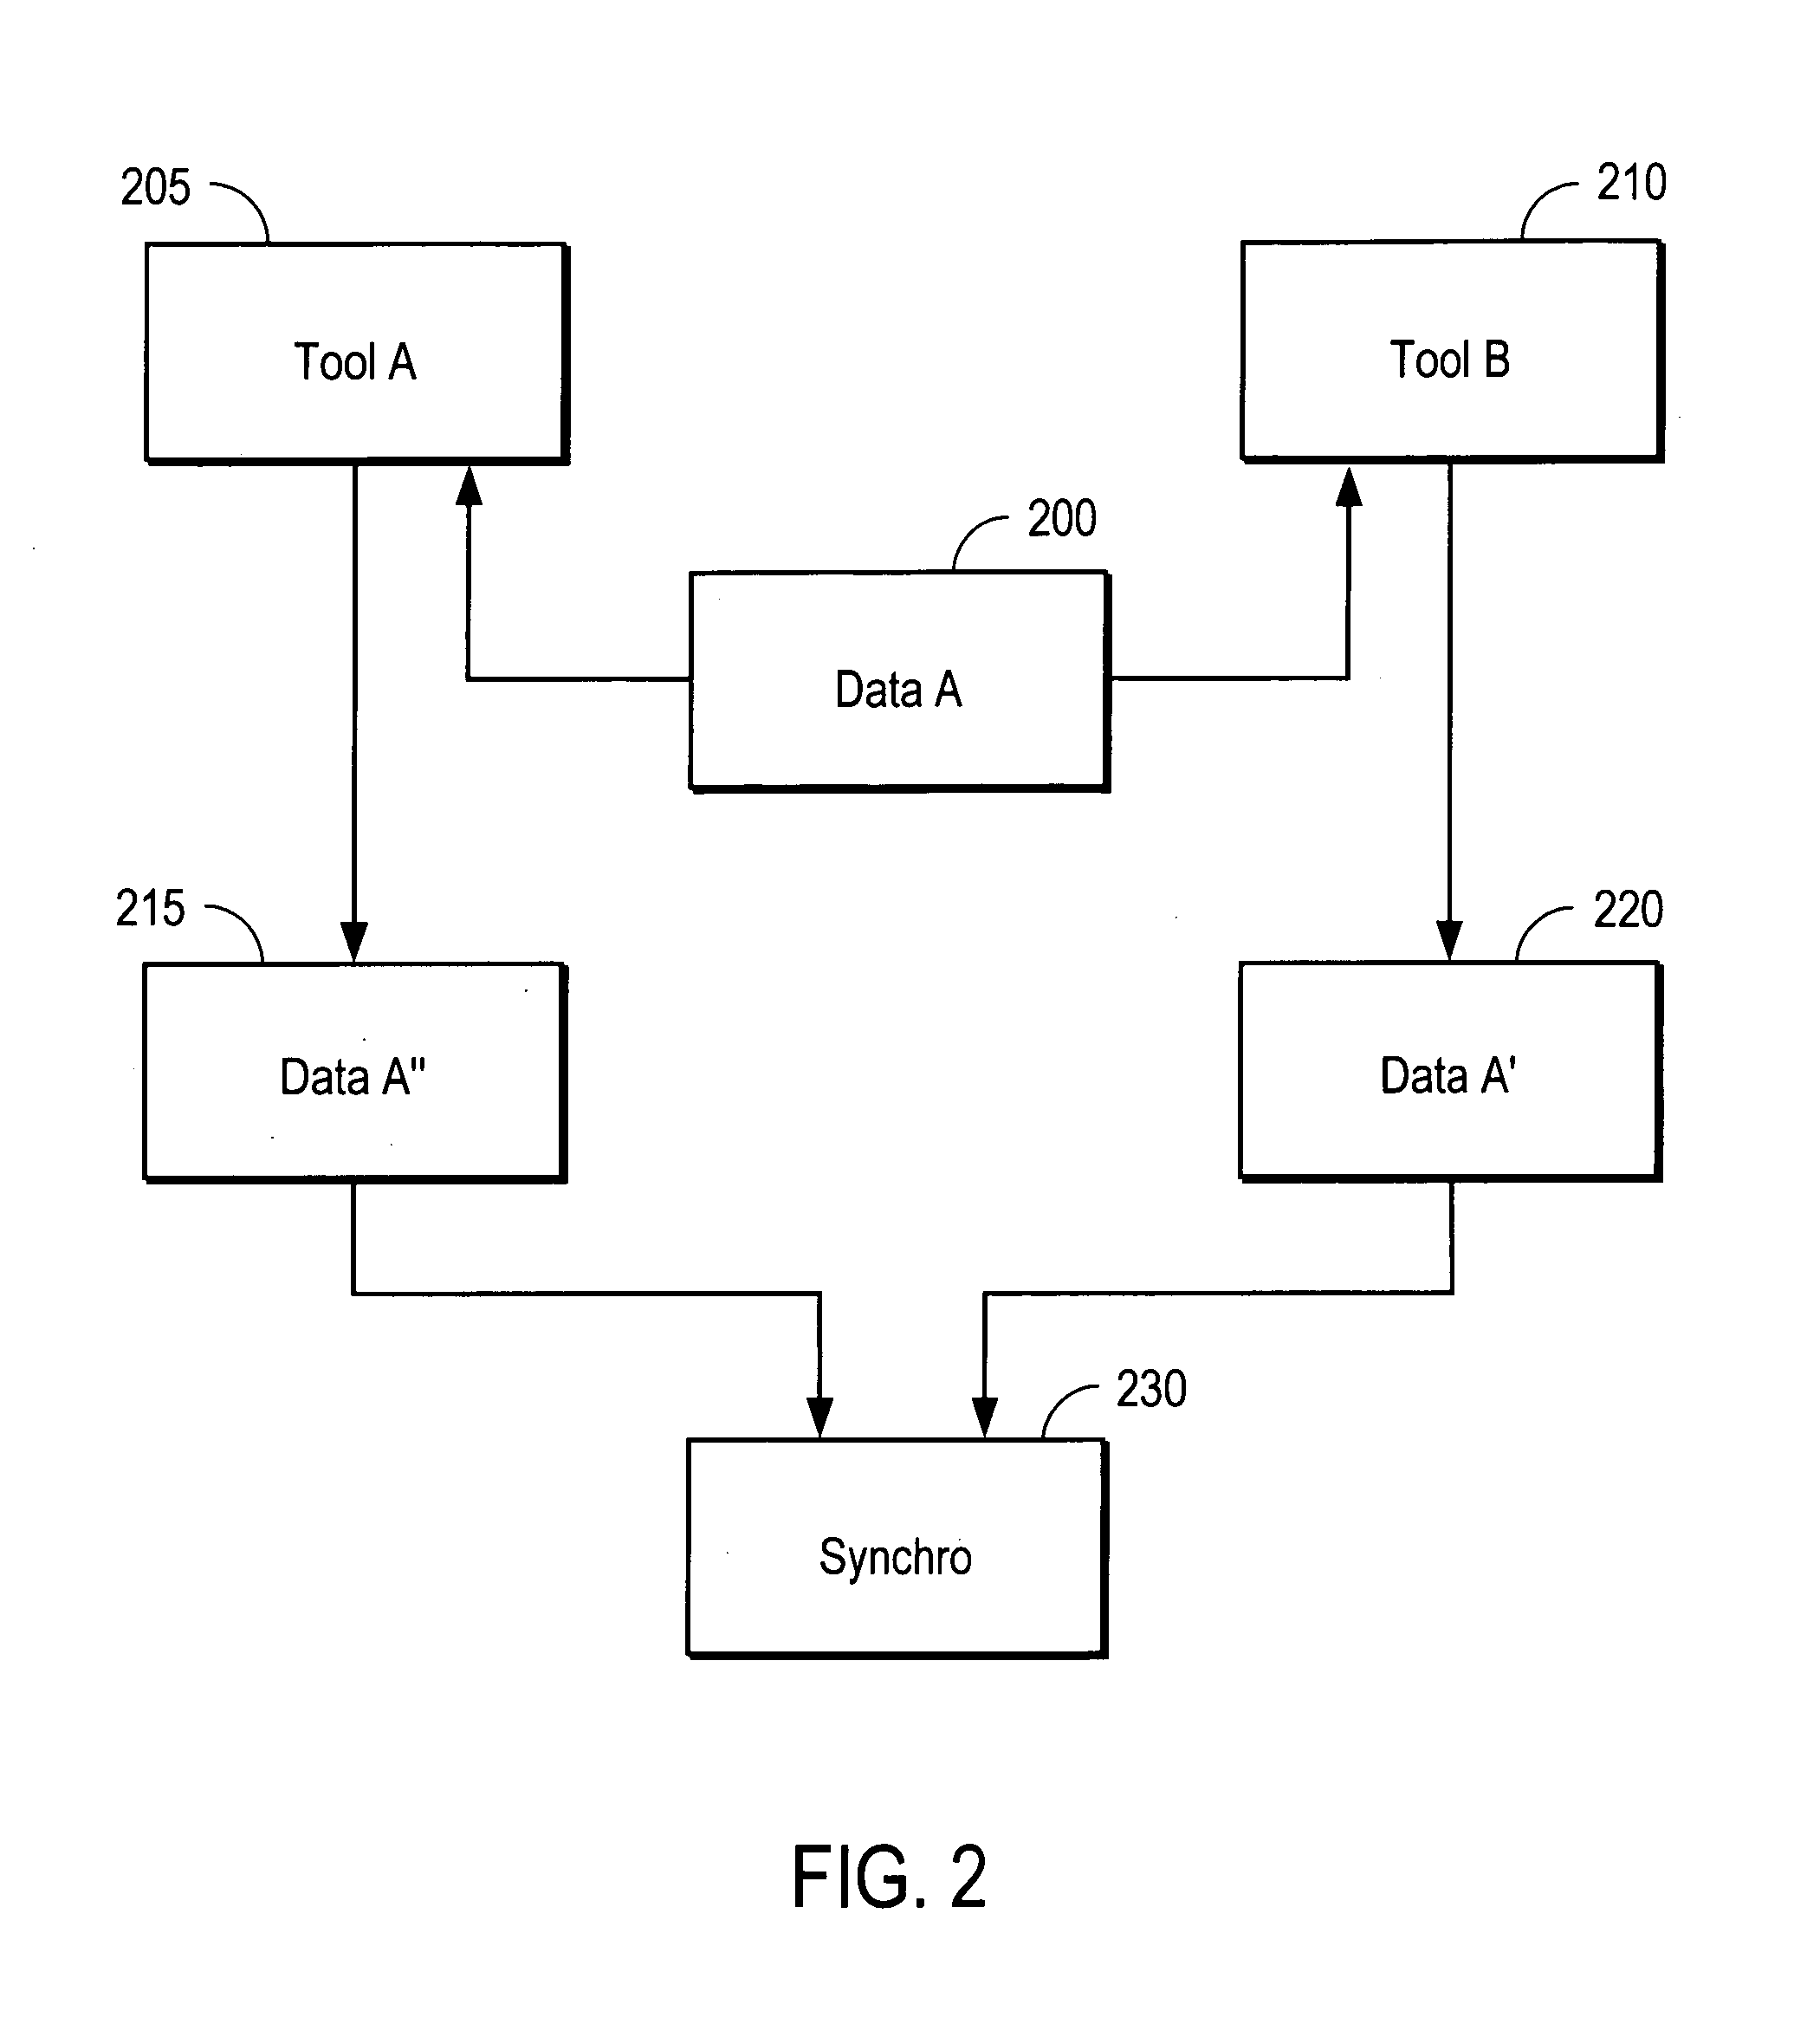 Method and apparatus for concurrent engineering and design synchronization of multiple tools